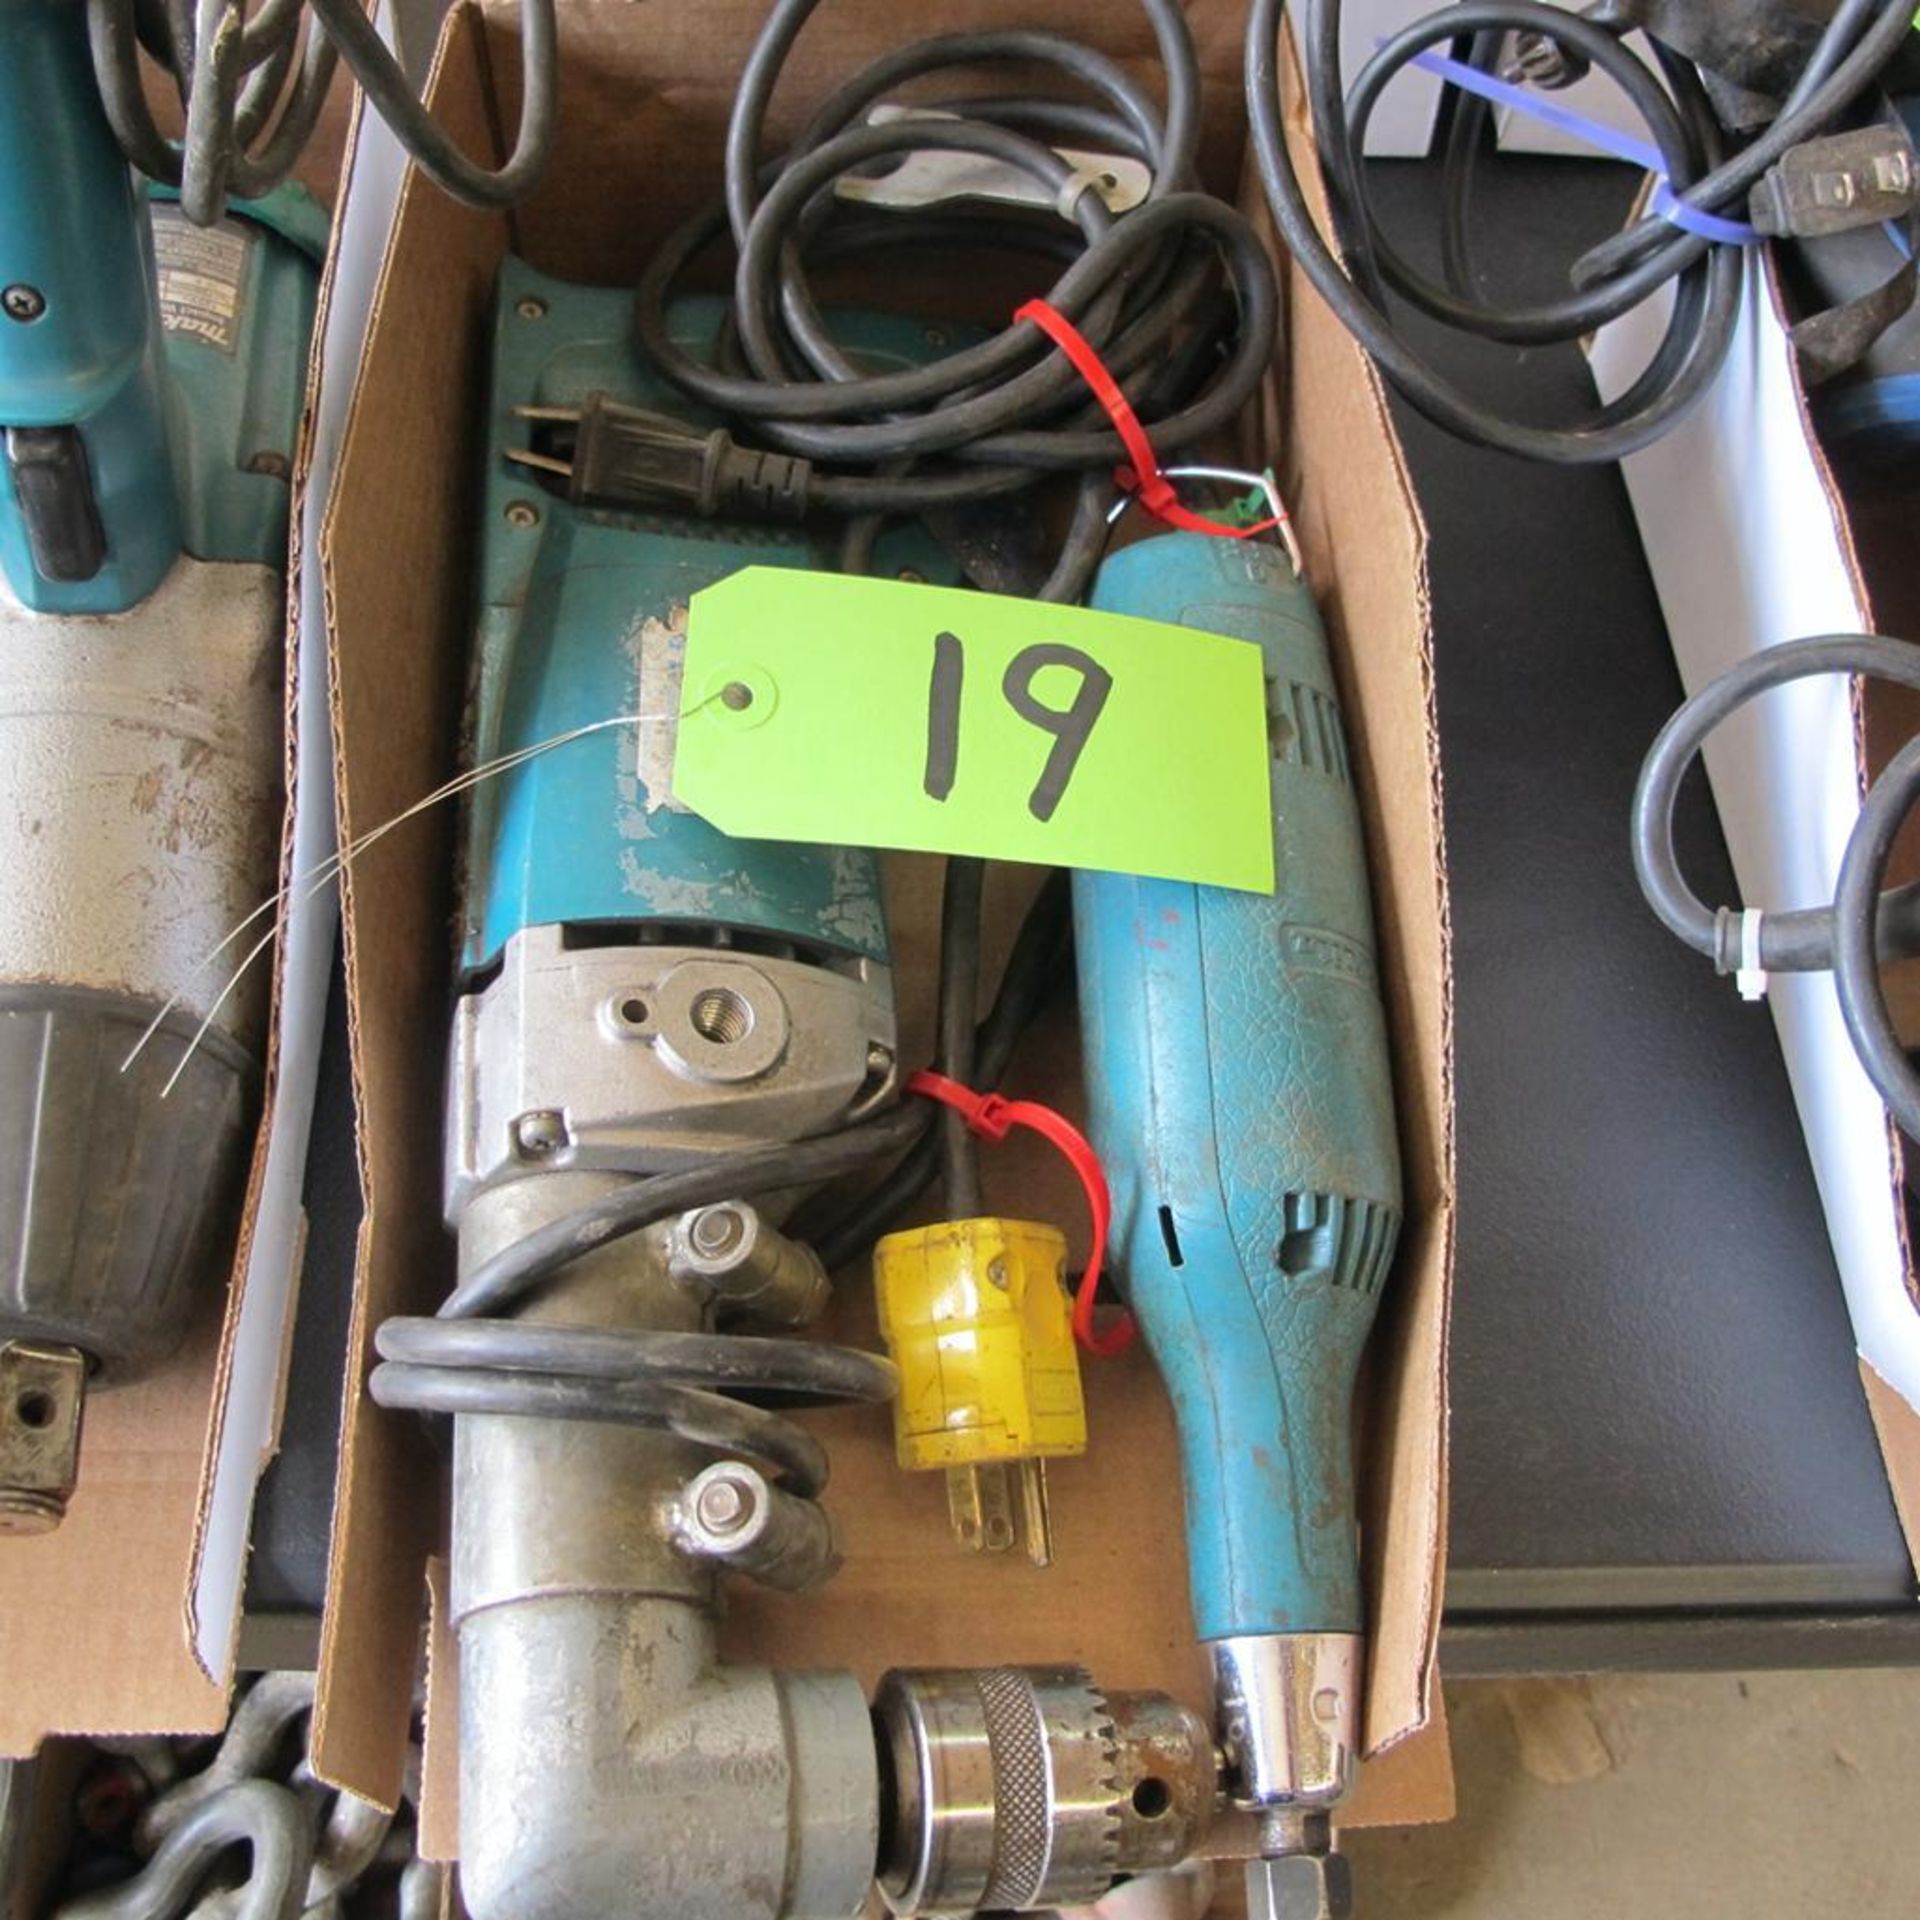 LOT OF 2 MAKITA POWER TOOLS (6300LR 1/2" ANGLE DRILL, 906 1/4" TIP GRINDER/POLISHER) (IN WEST BLDG)